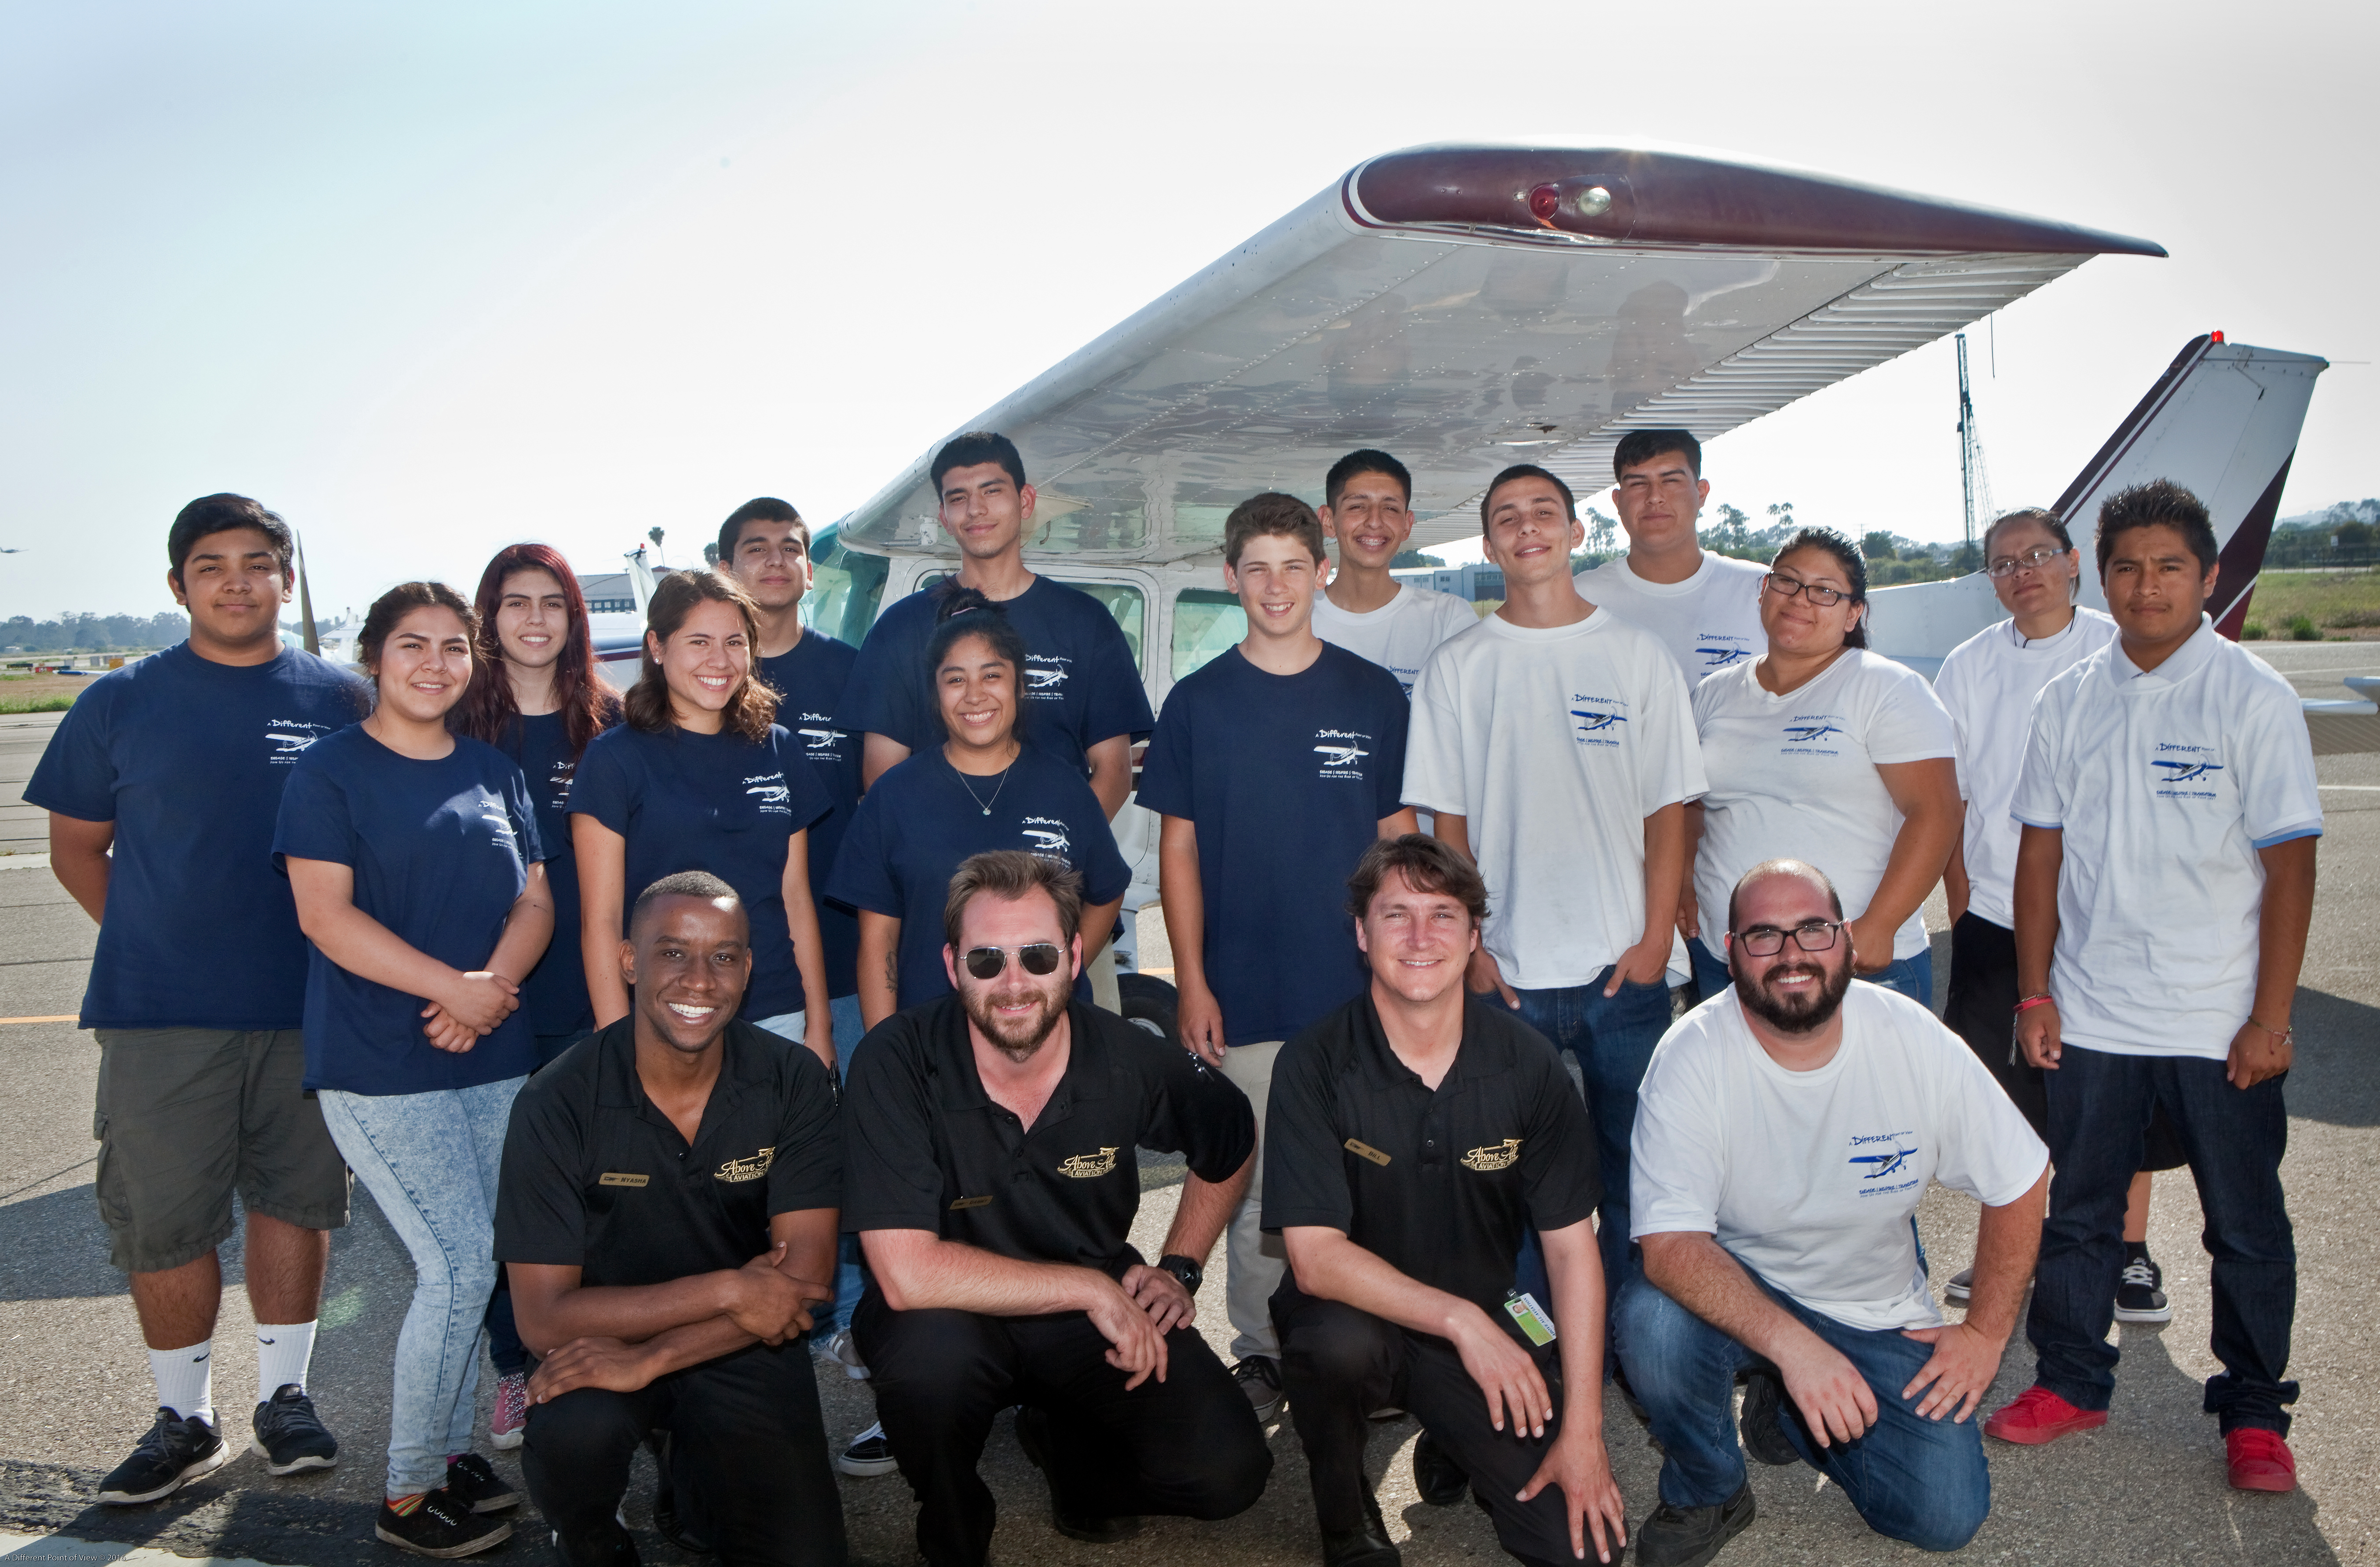 Above All Aviation instructors Nyasha Gutsa, Daniel Malacarne, and William Peterson and mechanic Mike Linhart, front row, pose for a photo with A Different Point of View students and staff during an aviation career day at the Santa Barbara Airport June 25. Photo courtesy of Lynn Houston.